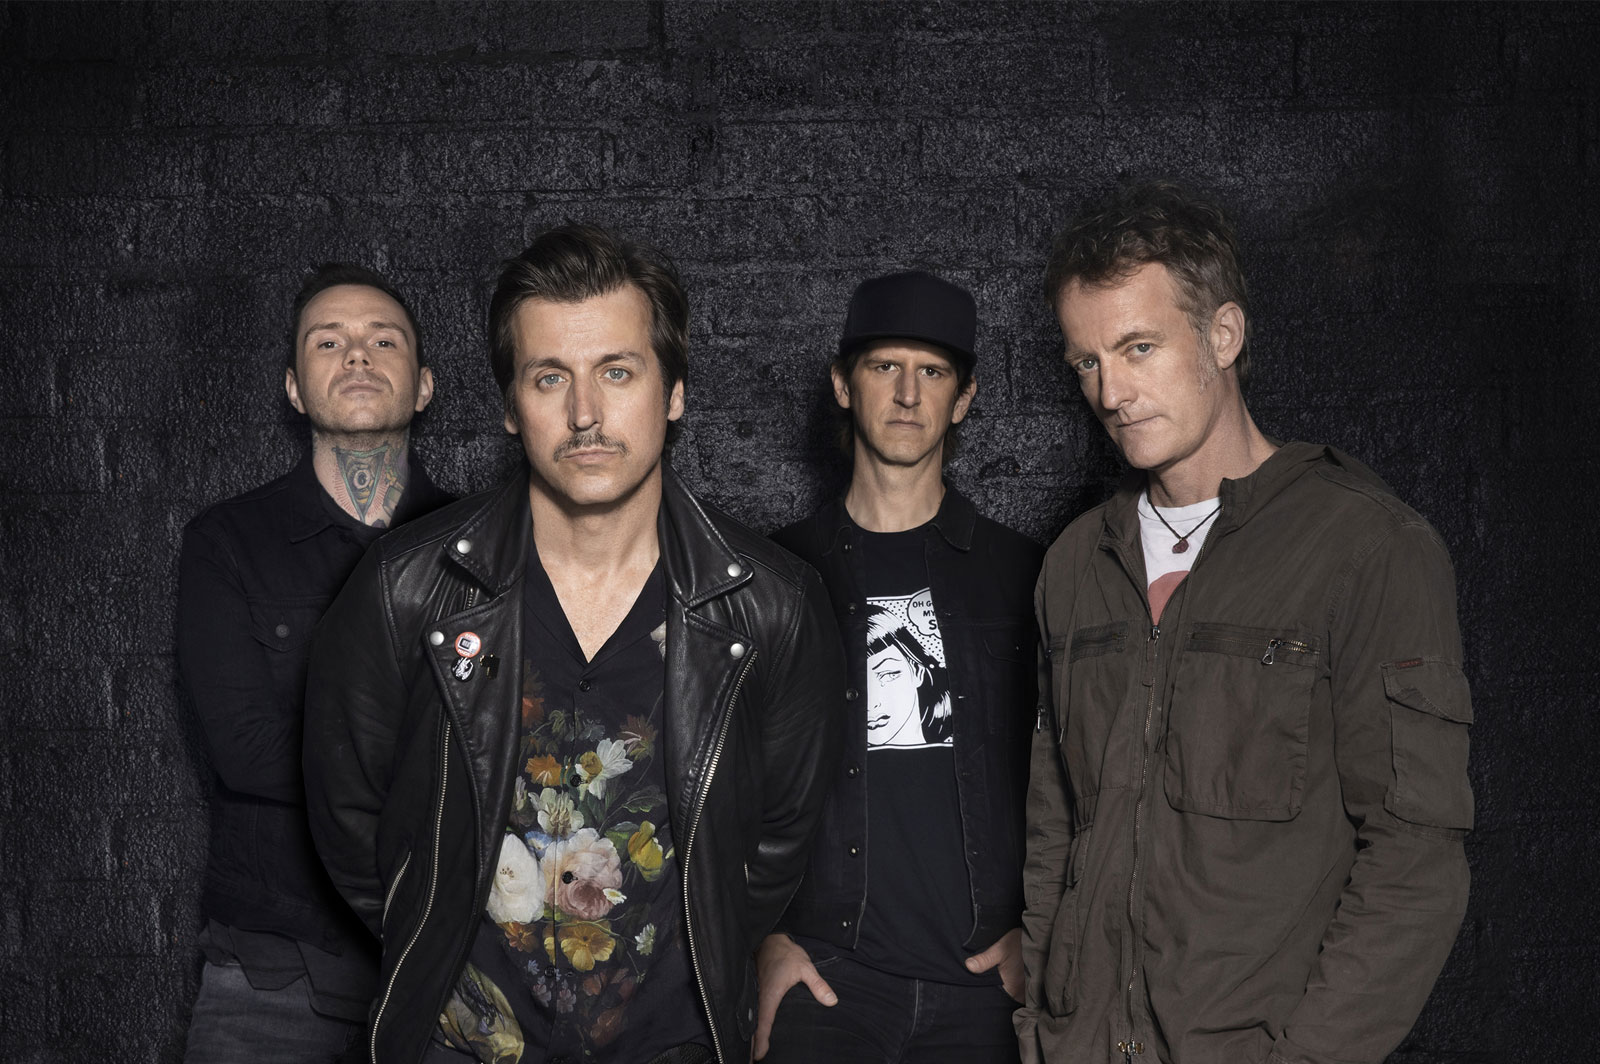 Our Lady Peace – The Wonderful Future Theatrical Experience